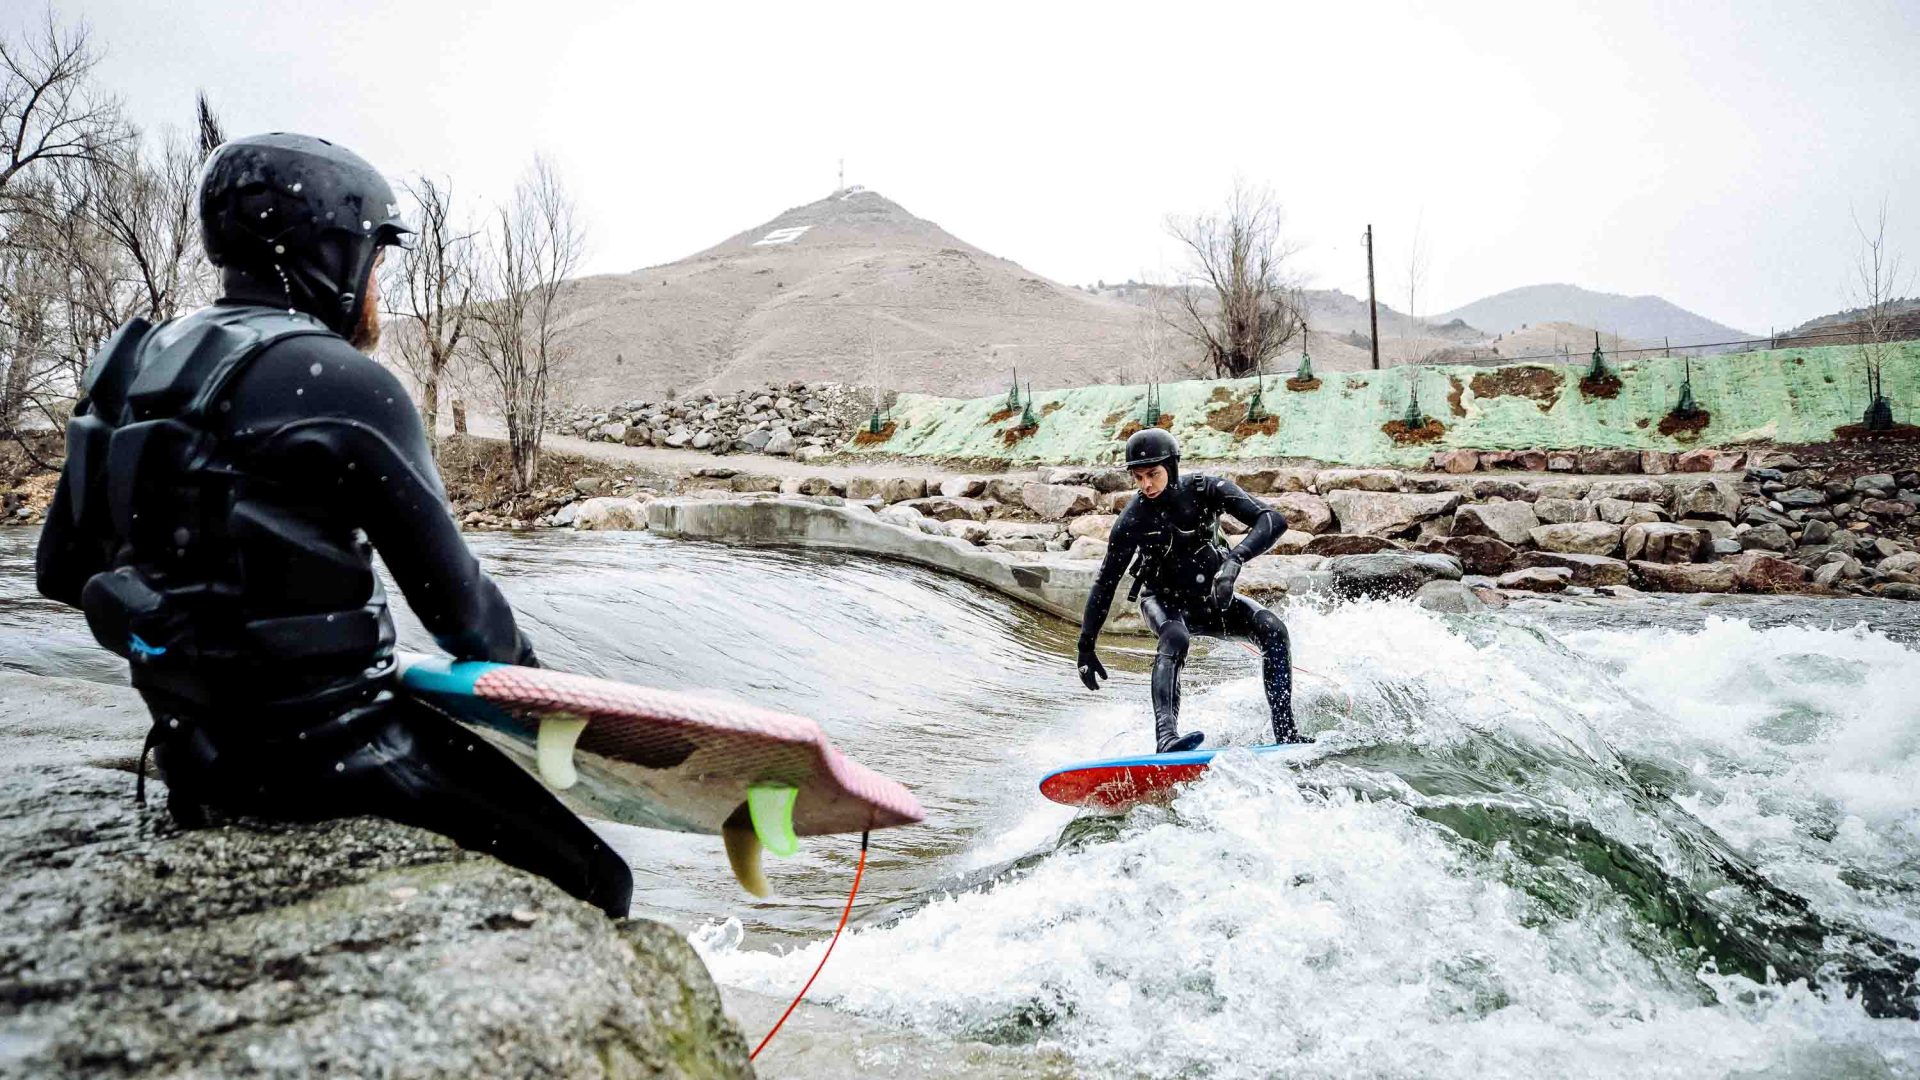 How the unlikely sport of surfing is bringing a Colorado river back to life